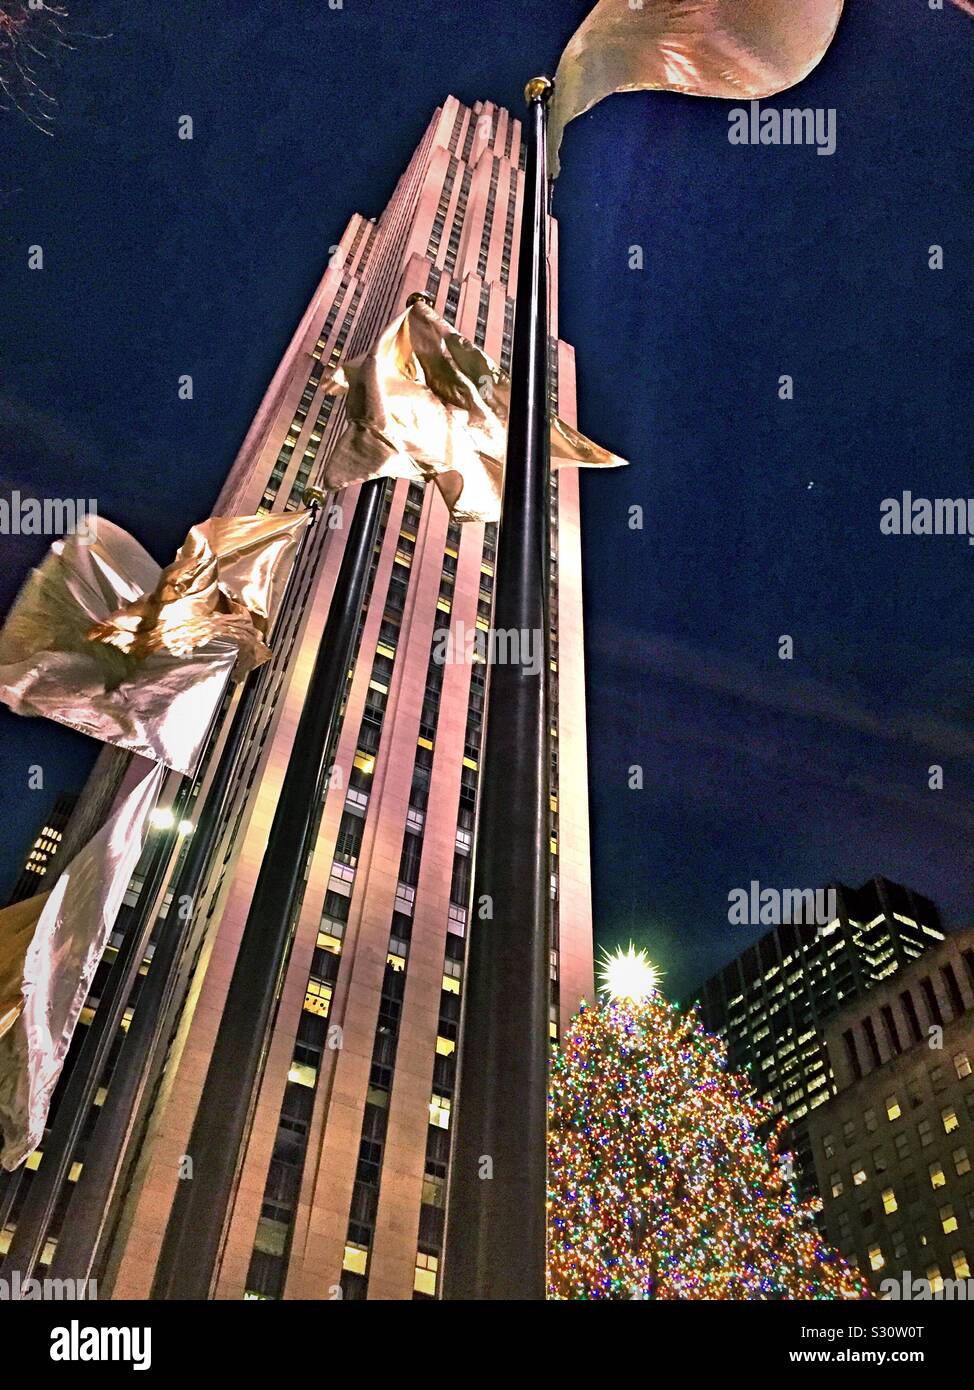 The iconic Christmas tree is at the base of the skyscraper 30 rock, NYC, USA Stock Photo